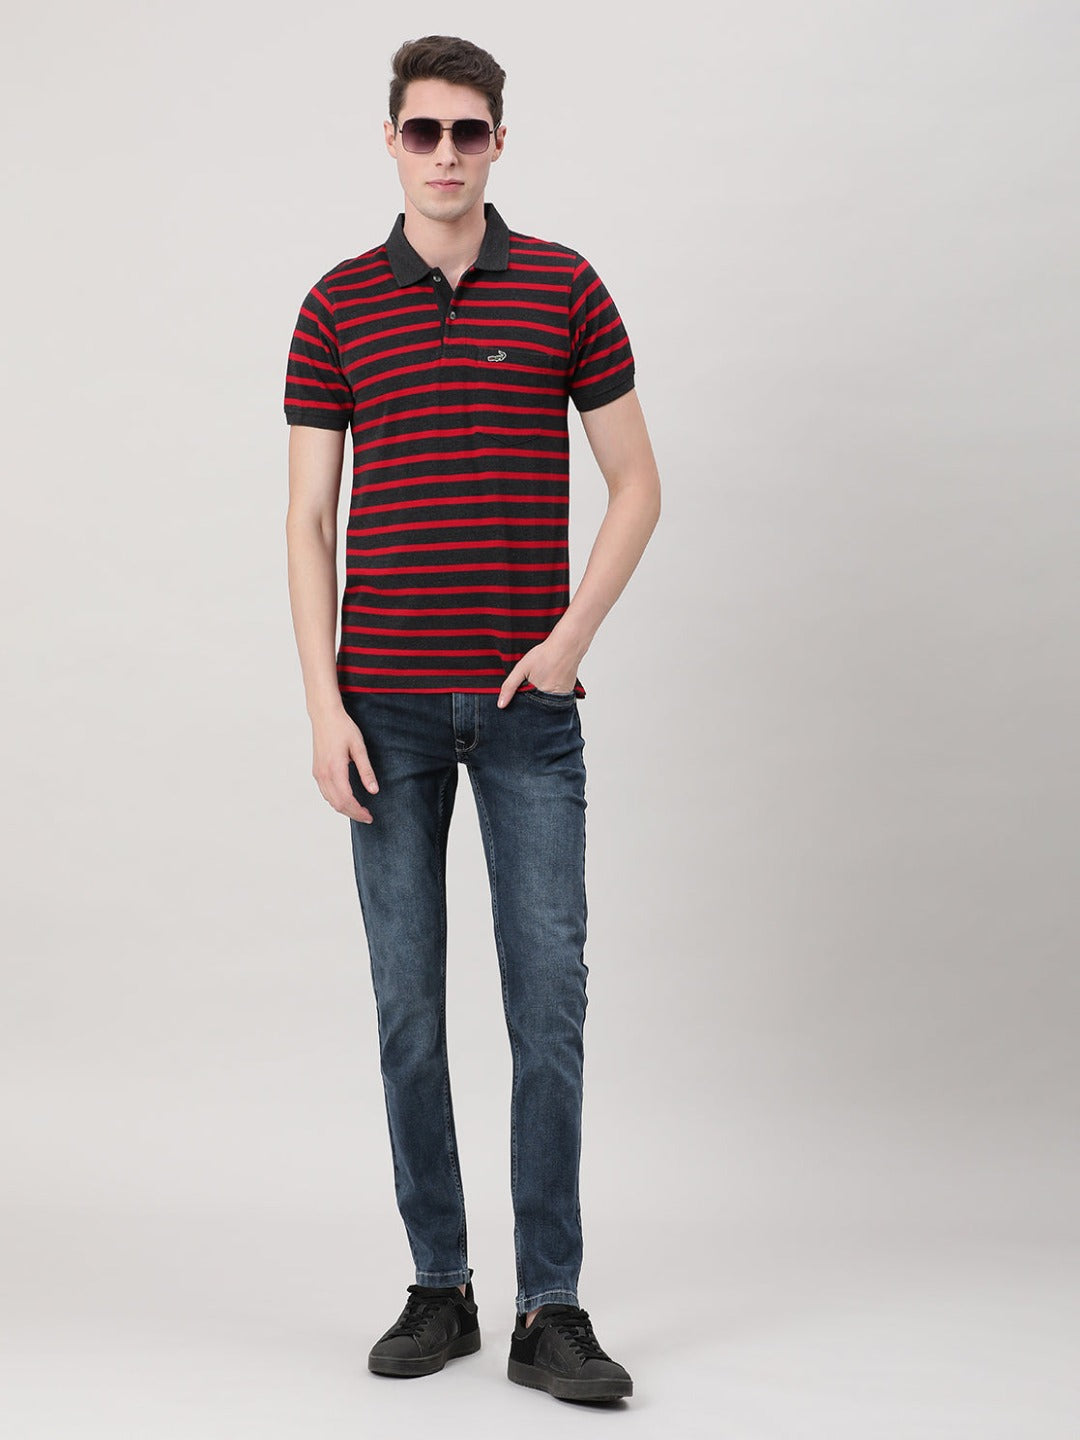 Crocodile Casual Red T-Shirt Striper Half Sleeve Slim Fit with Collar